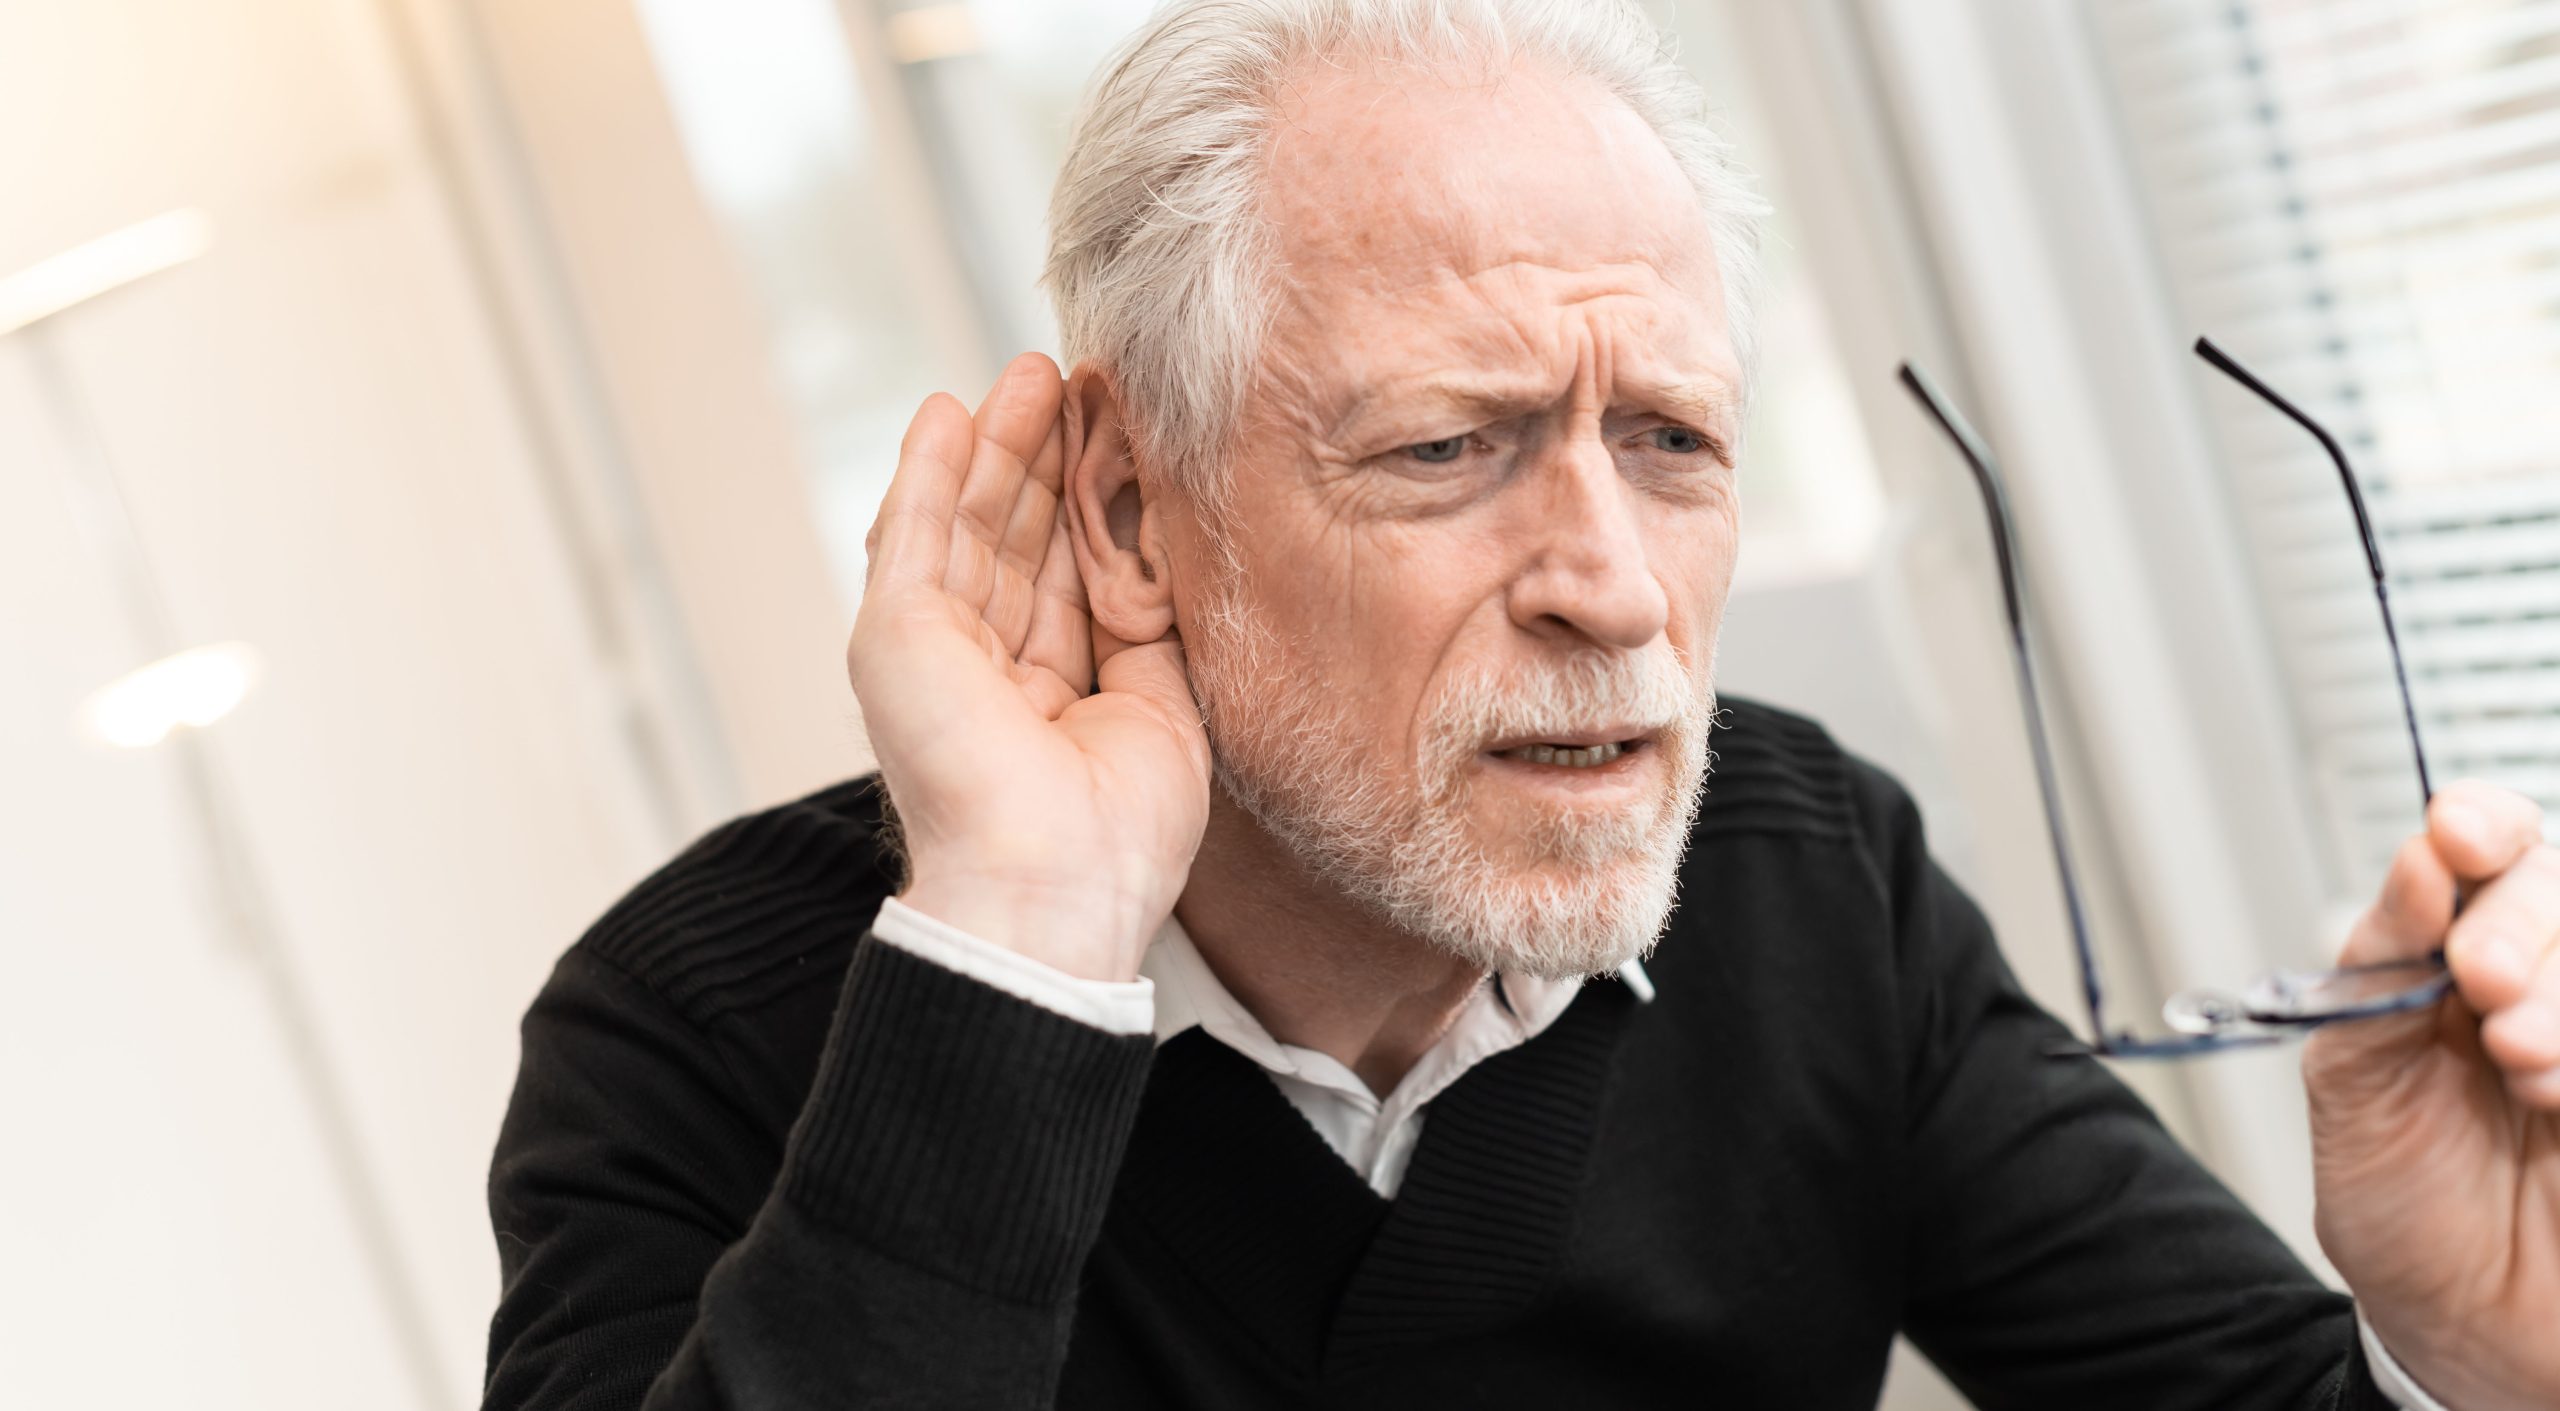 Can custom ear molds help with feedback issues in hearing aids?